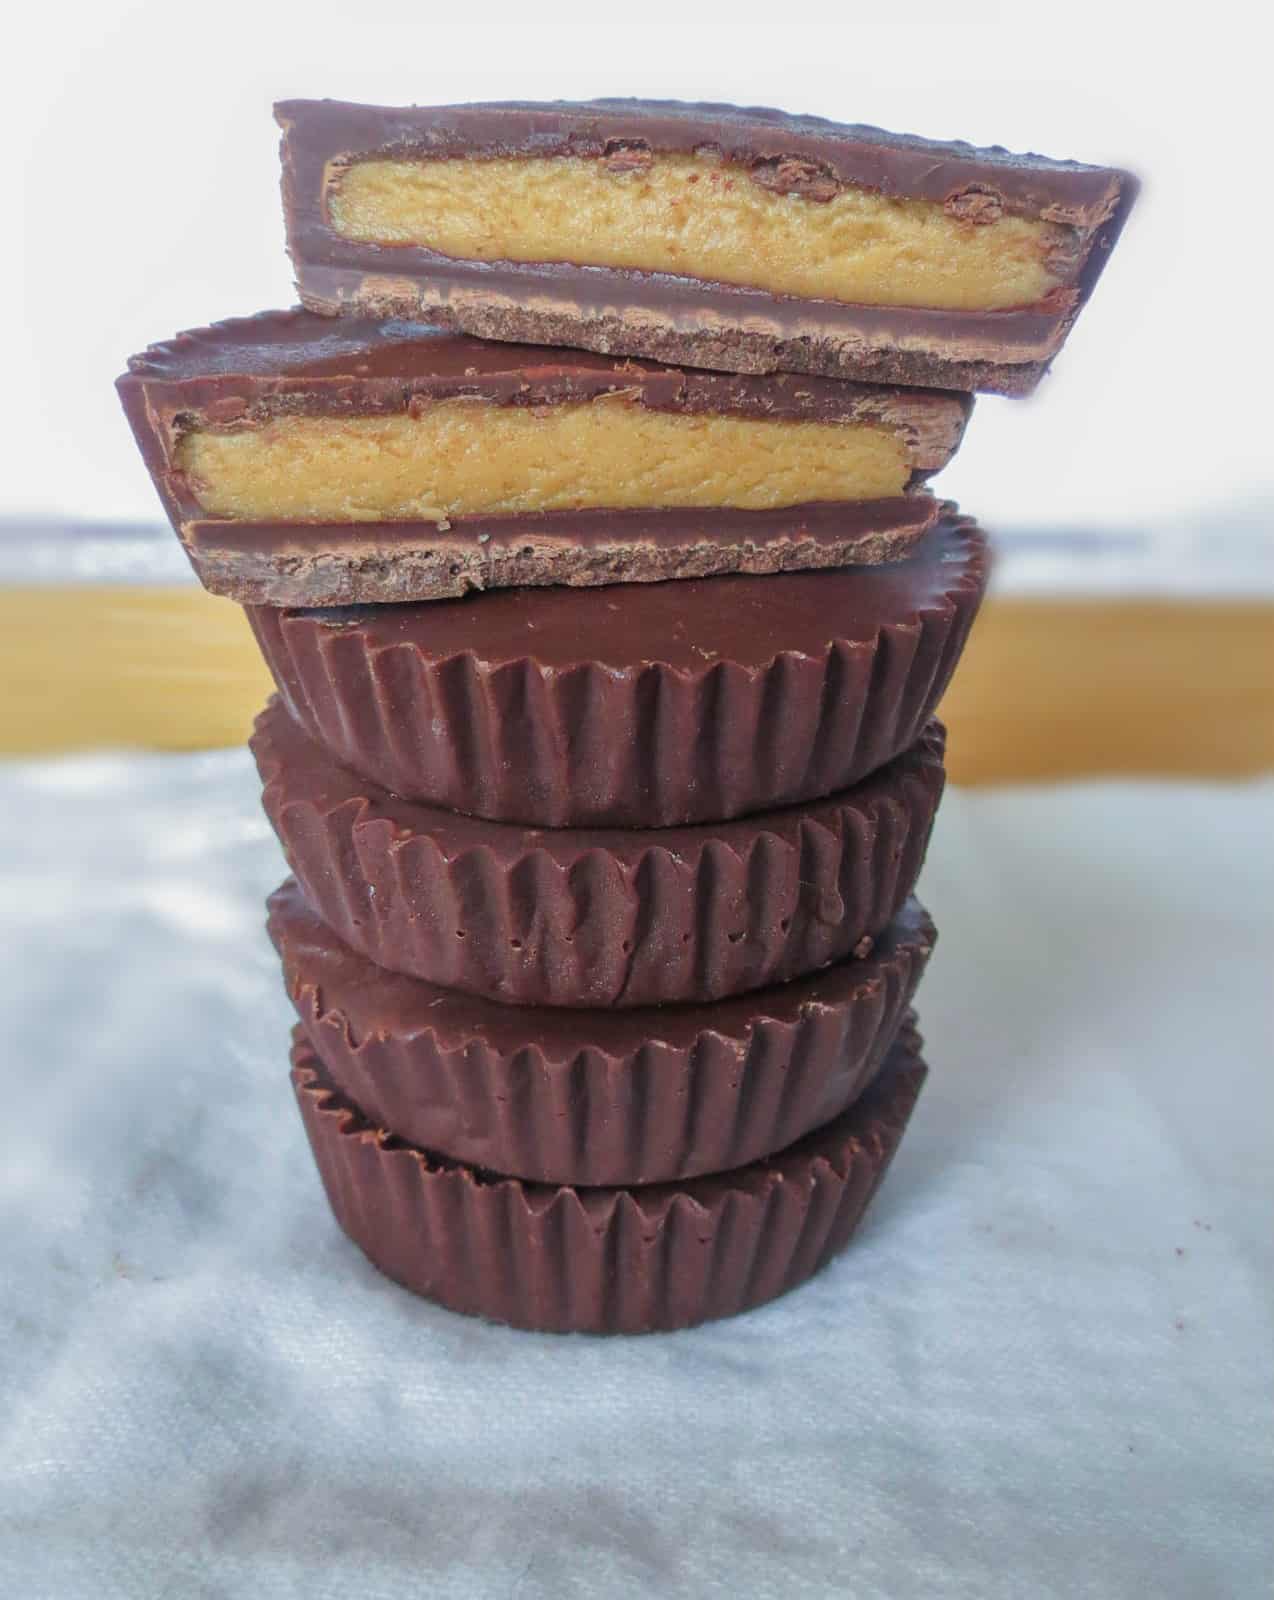 Homemade Reese's Peanut Butter Cups - Sprinkle Some Sugar